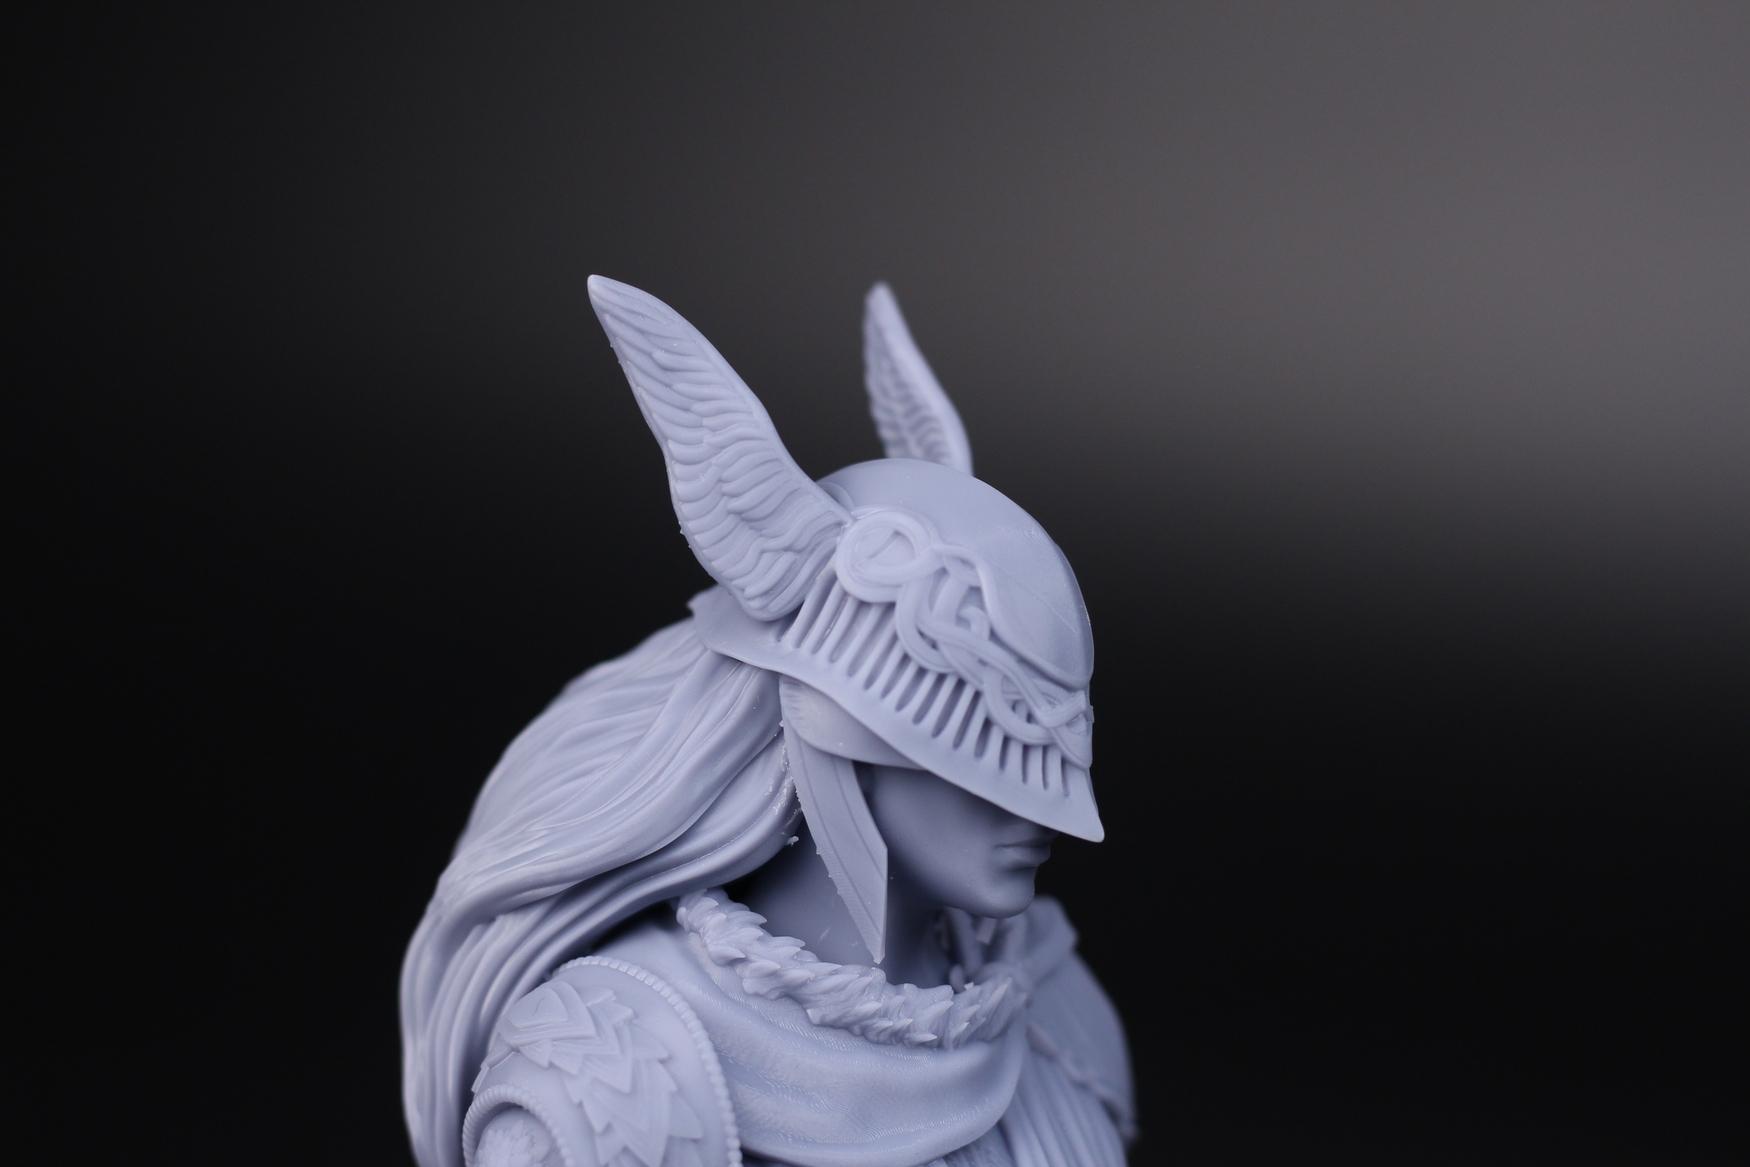 Malenia Bust printed on Anycubic M31 | Anycubic Photon M3 Review: Bridging the gap